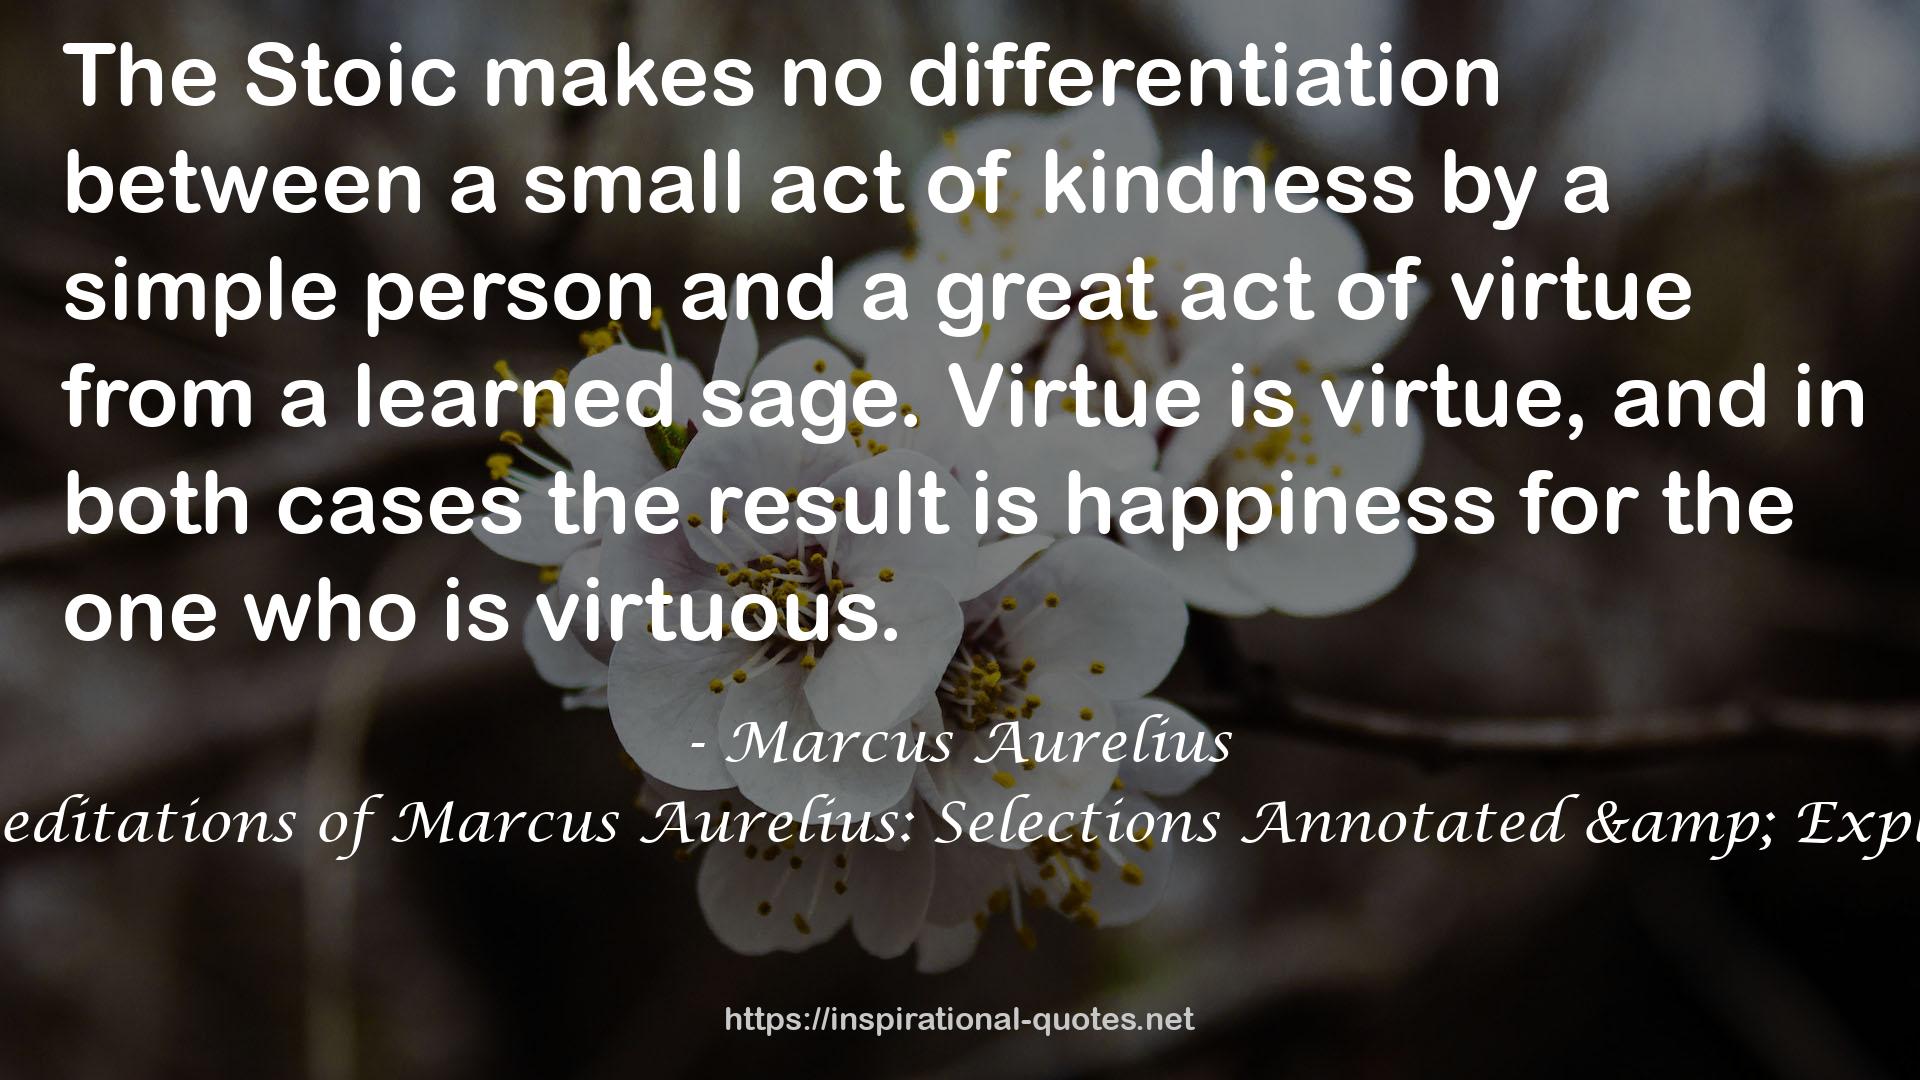 The Meditations of Marcus Aurelius: Selections Annotated & Explained QUOTES